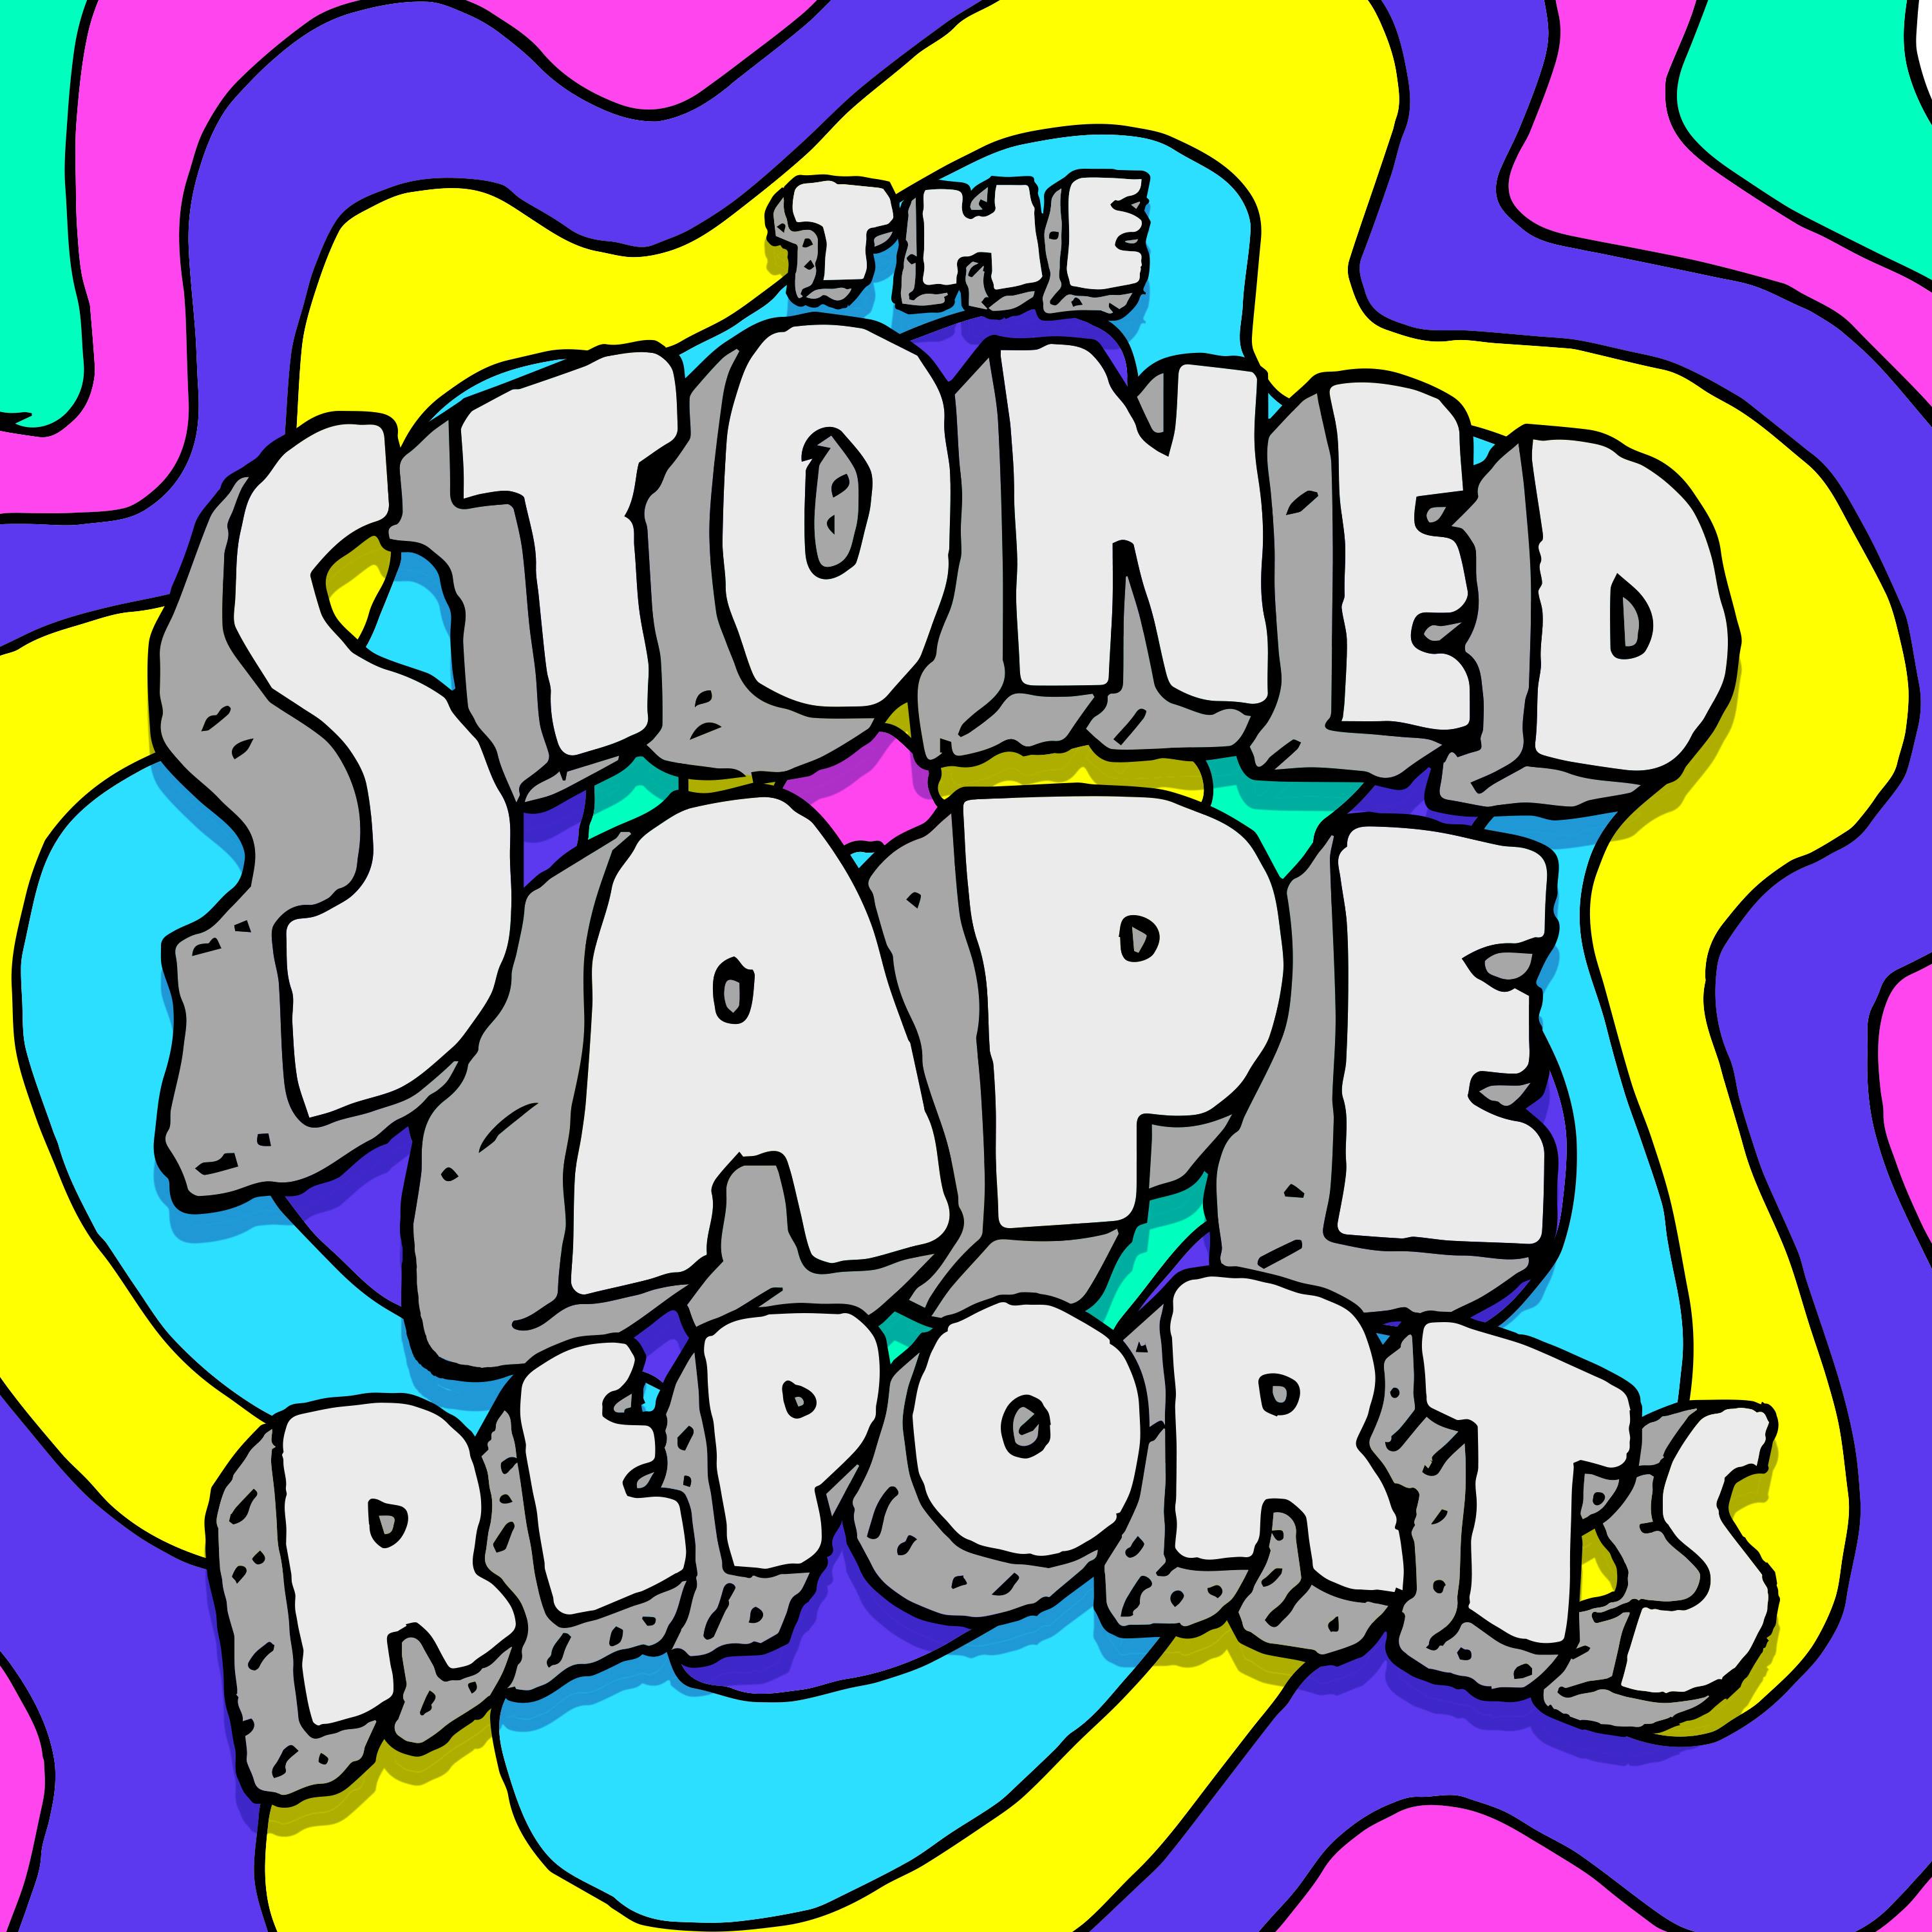 The Stoned Ape Reports